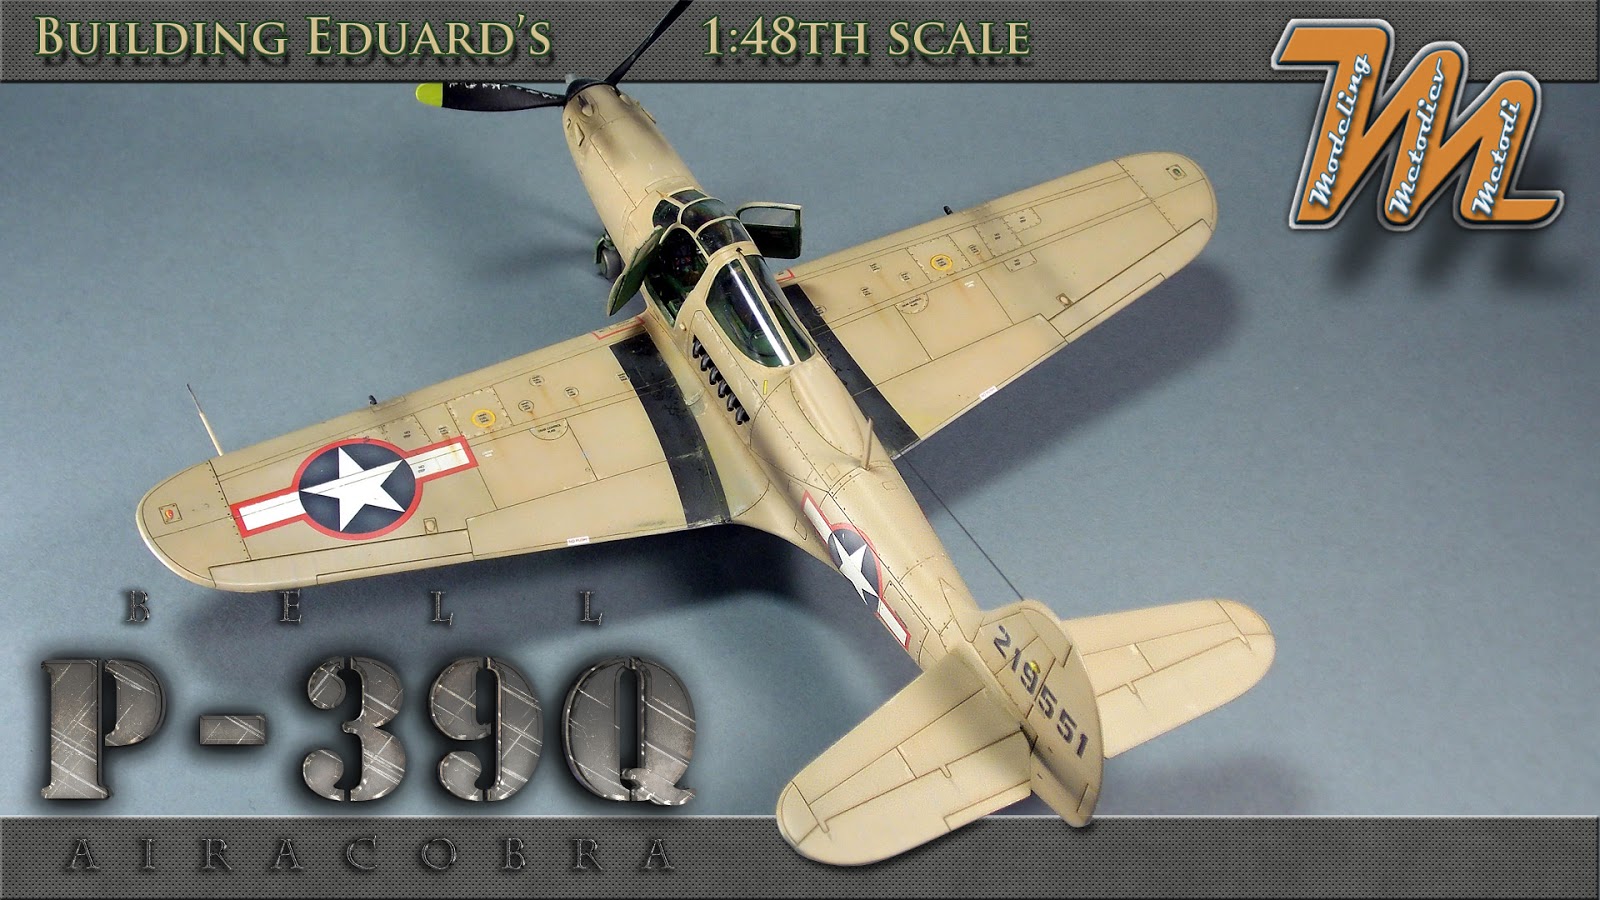 Bell P39 Q Airacobra, USAF, scale model